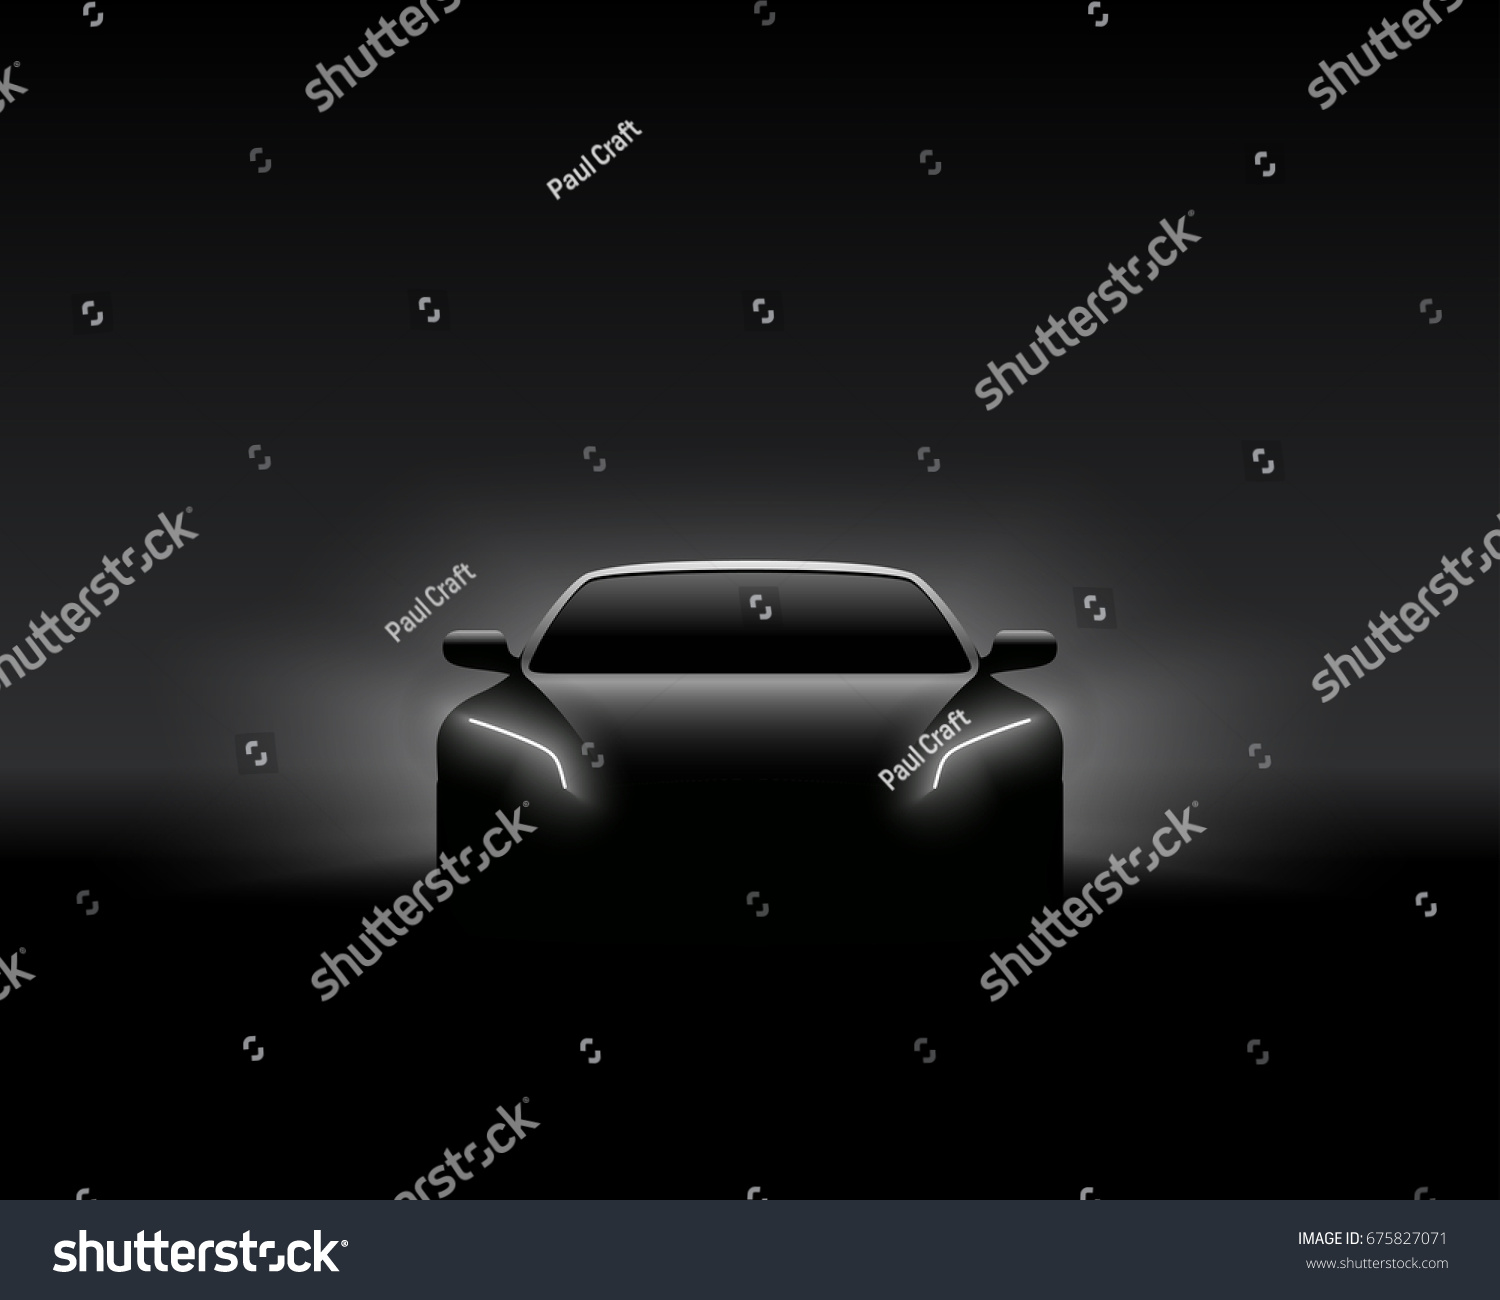 SVG of Front View Dark Concept Car Silhouette. Realistic Vector Illustration. svg